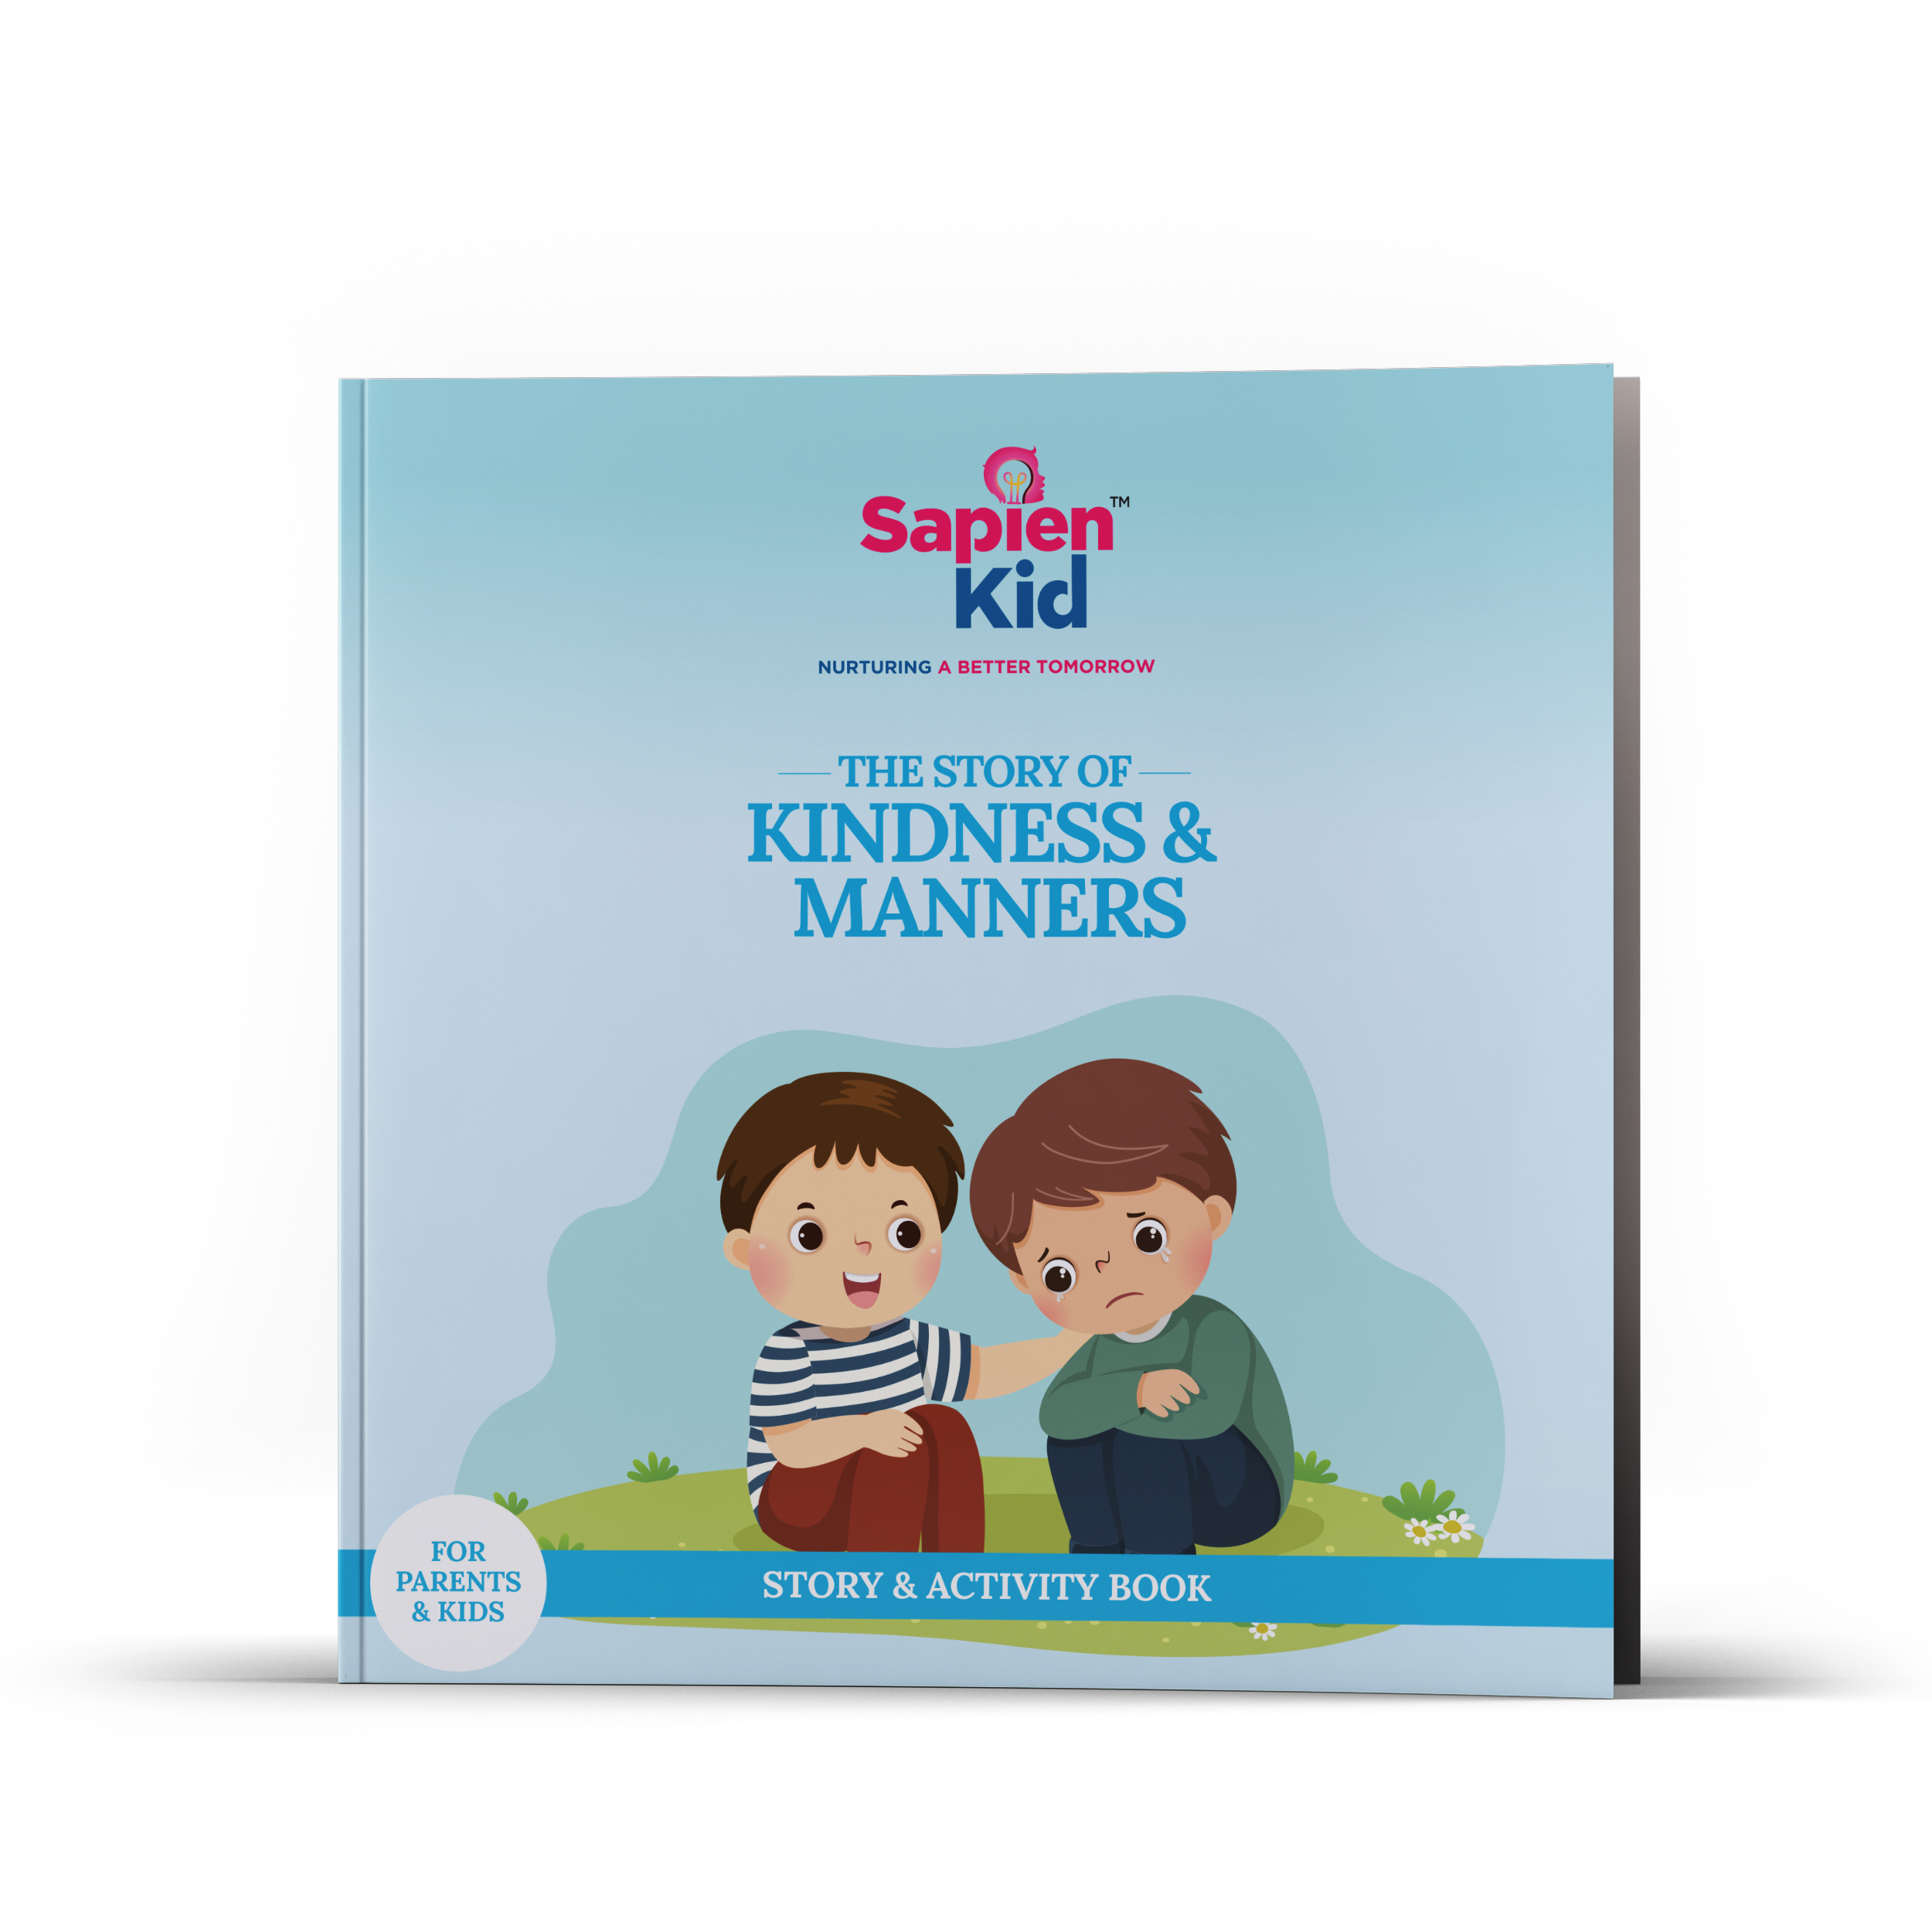 The Story of Kindness & Manners - Sapien Fable | Sapien Kid